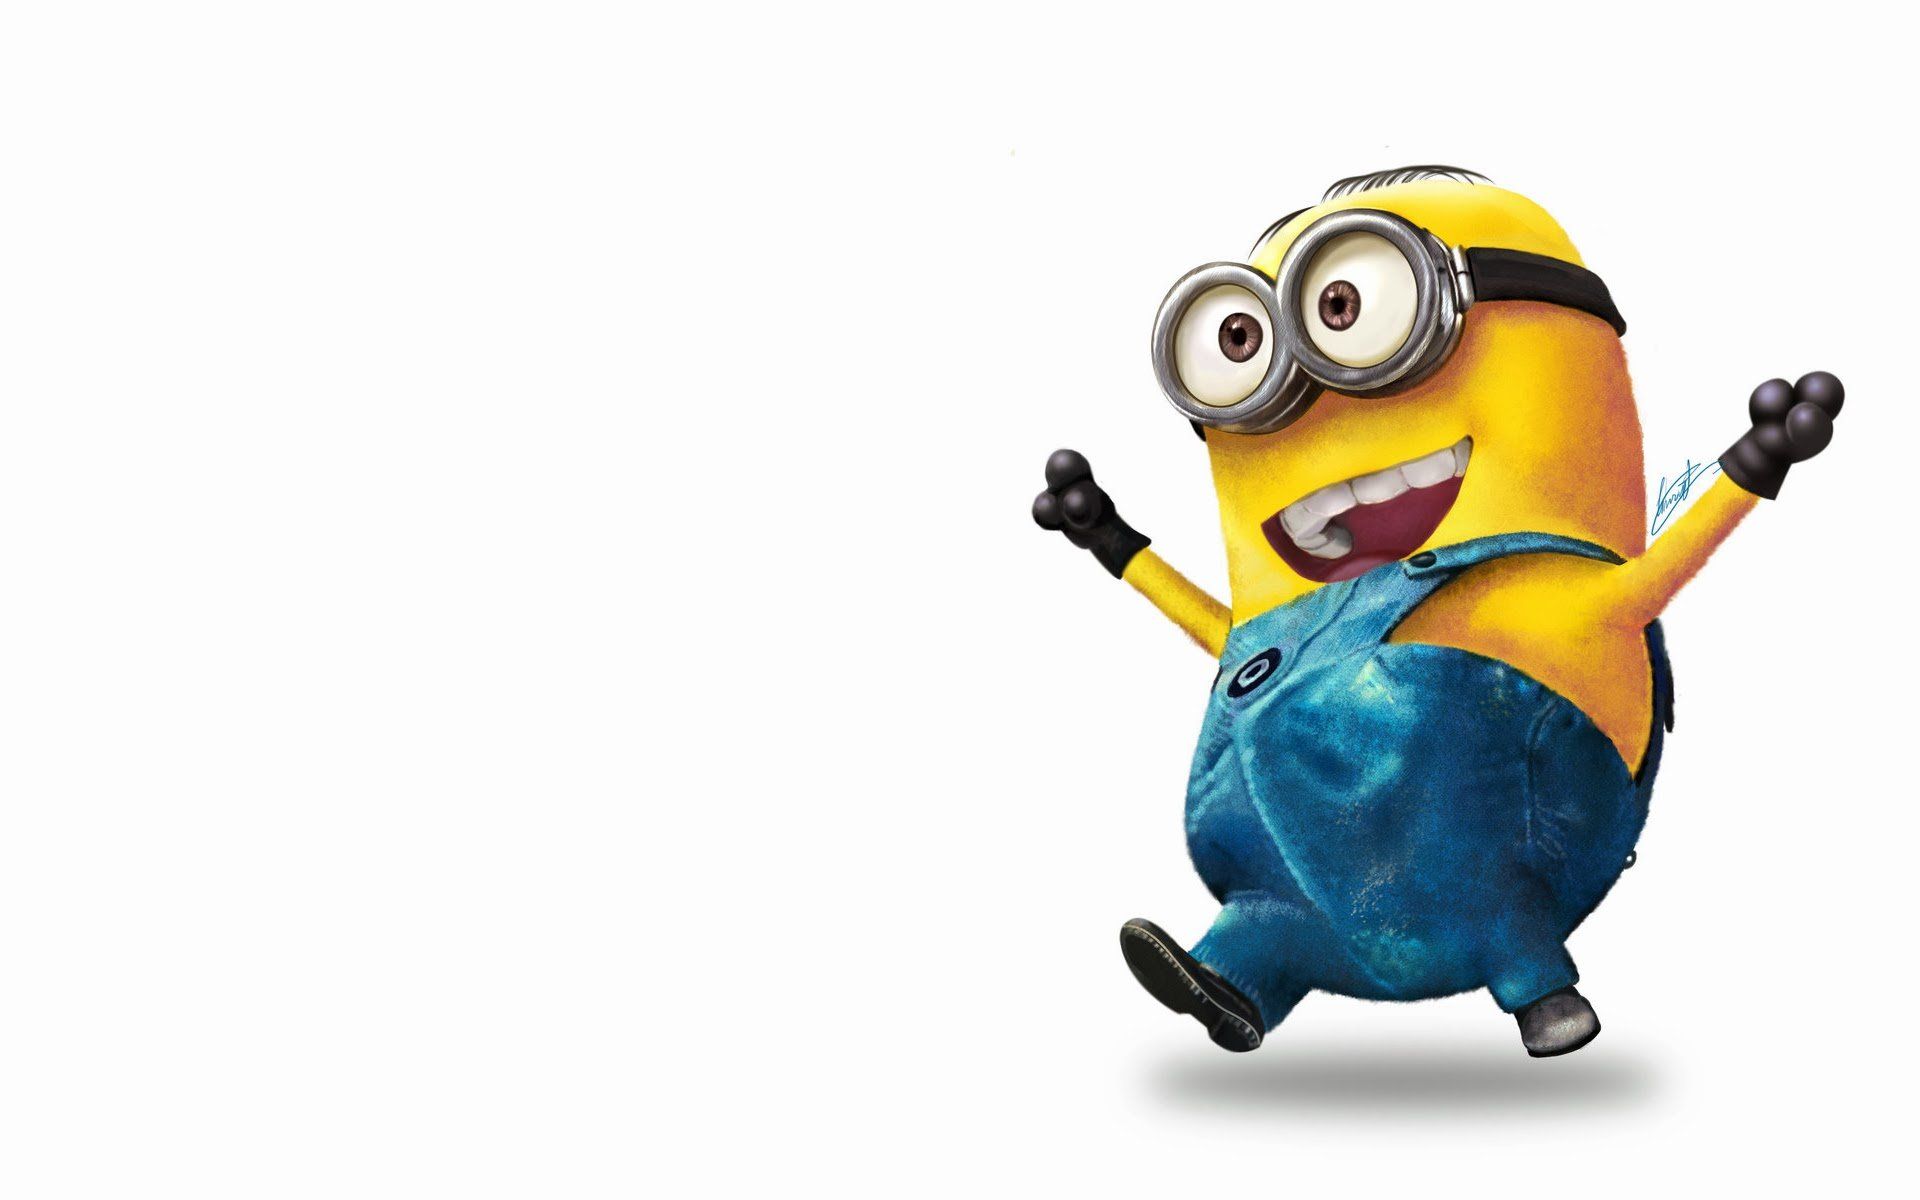 Download Minions Wallpaper For Android #fljbx » hdxwallpaperz.com